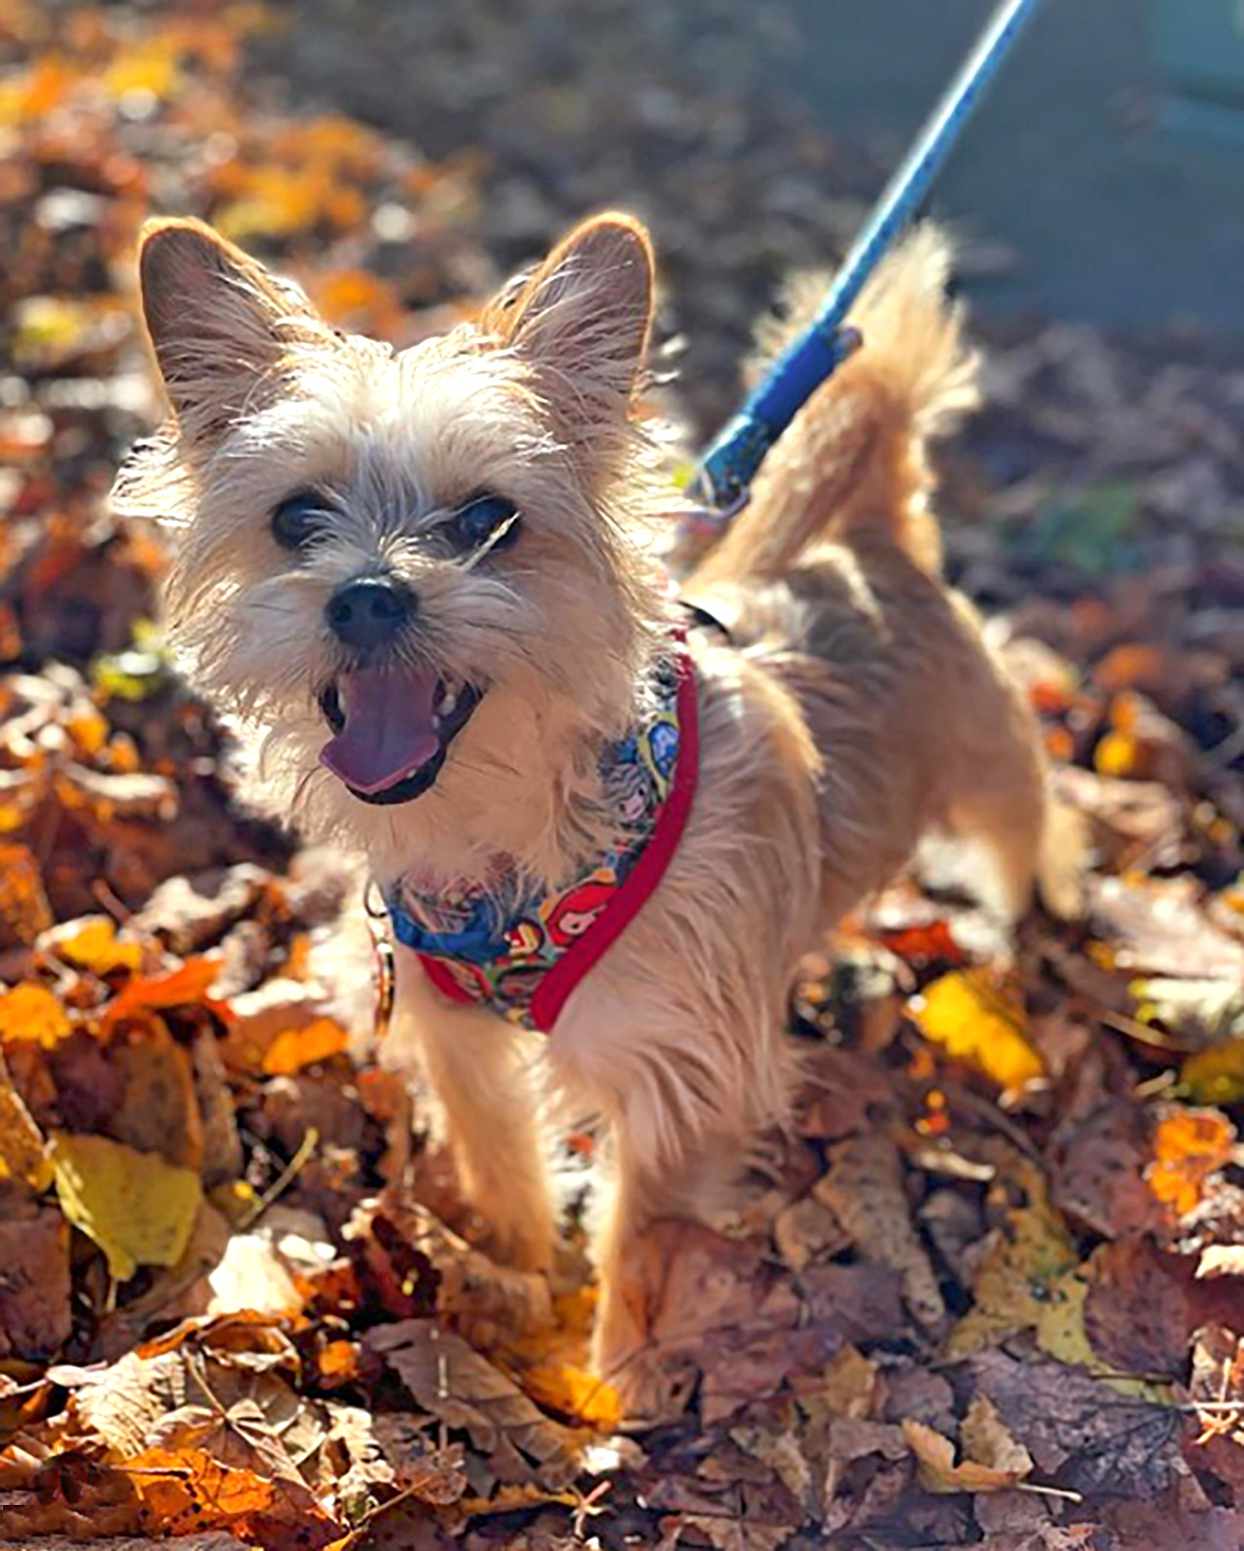 Beige Chorkie, Chihuahua and Yorkie mix, standing in fall leaves